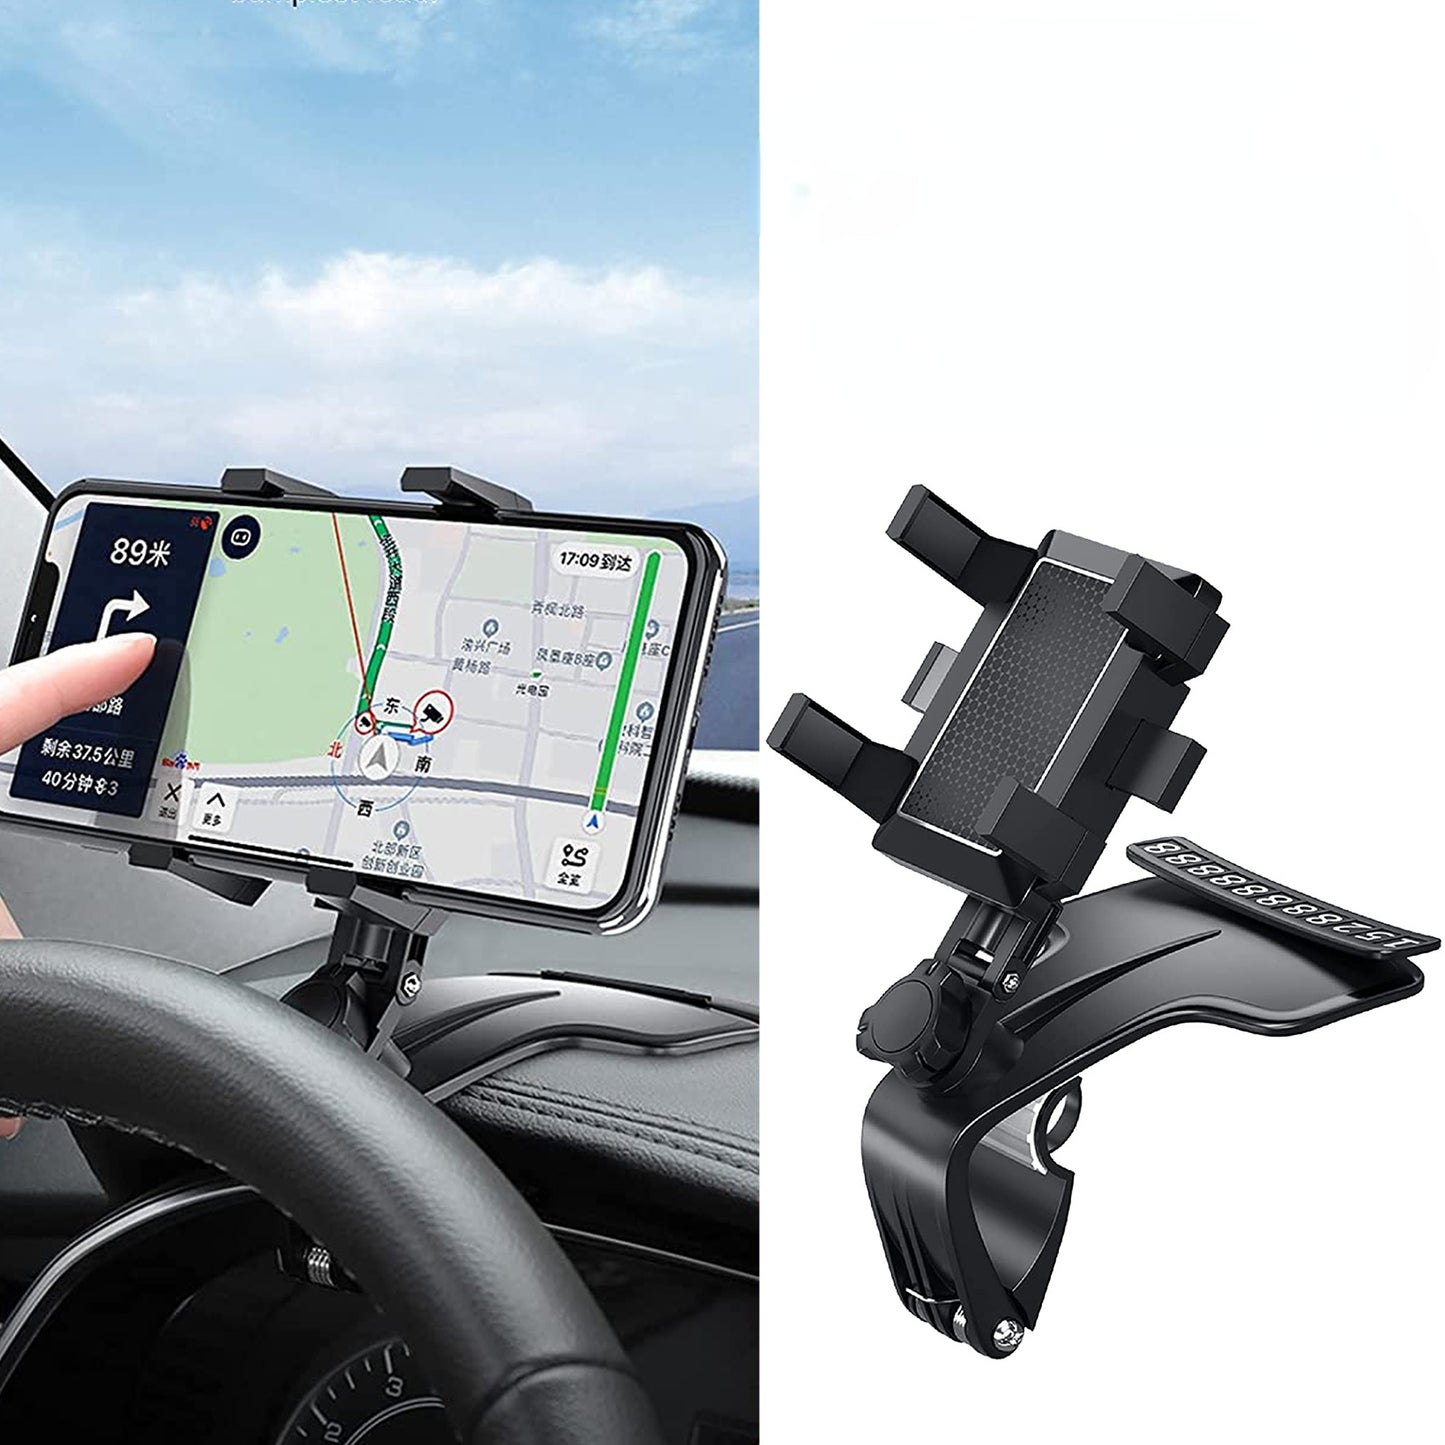 Car Mount Holder for Cell Phone Dashboard iPhone Samsung